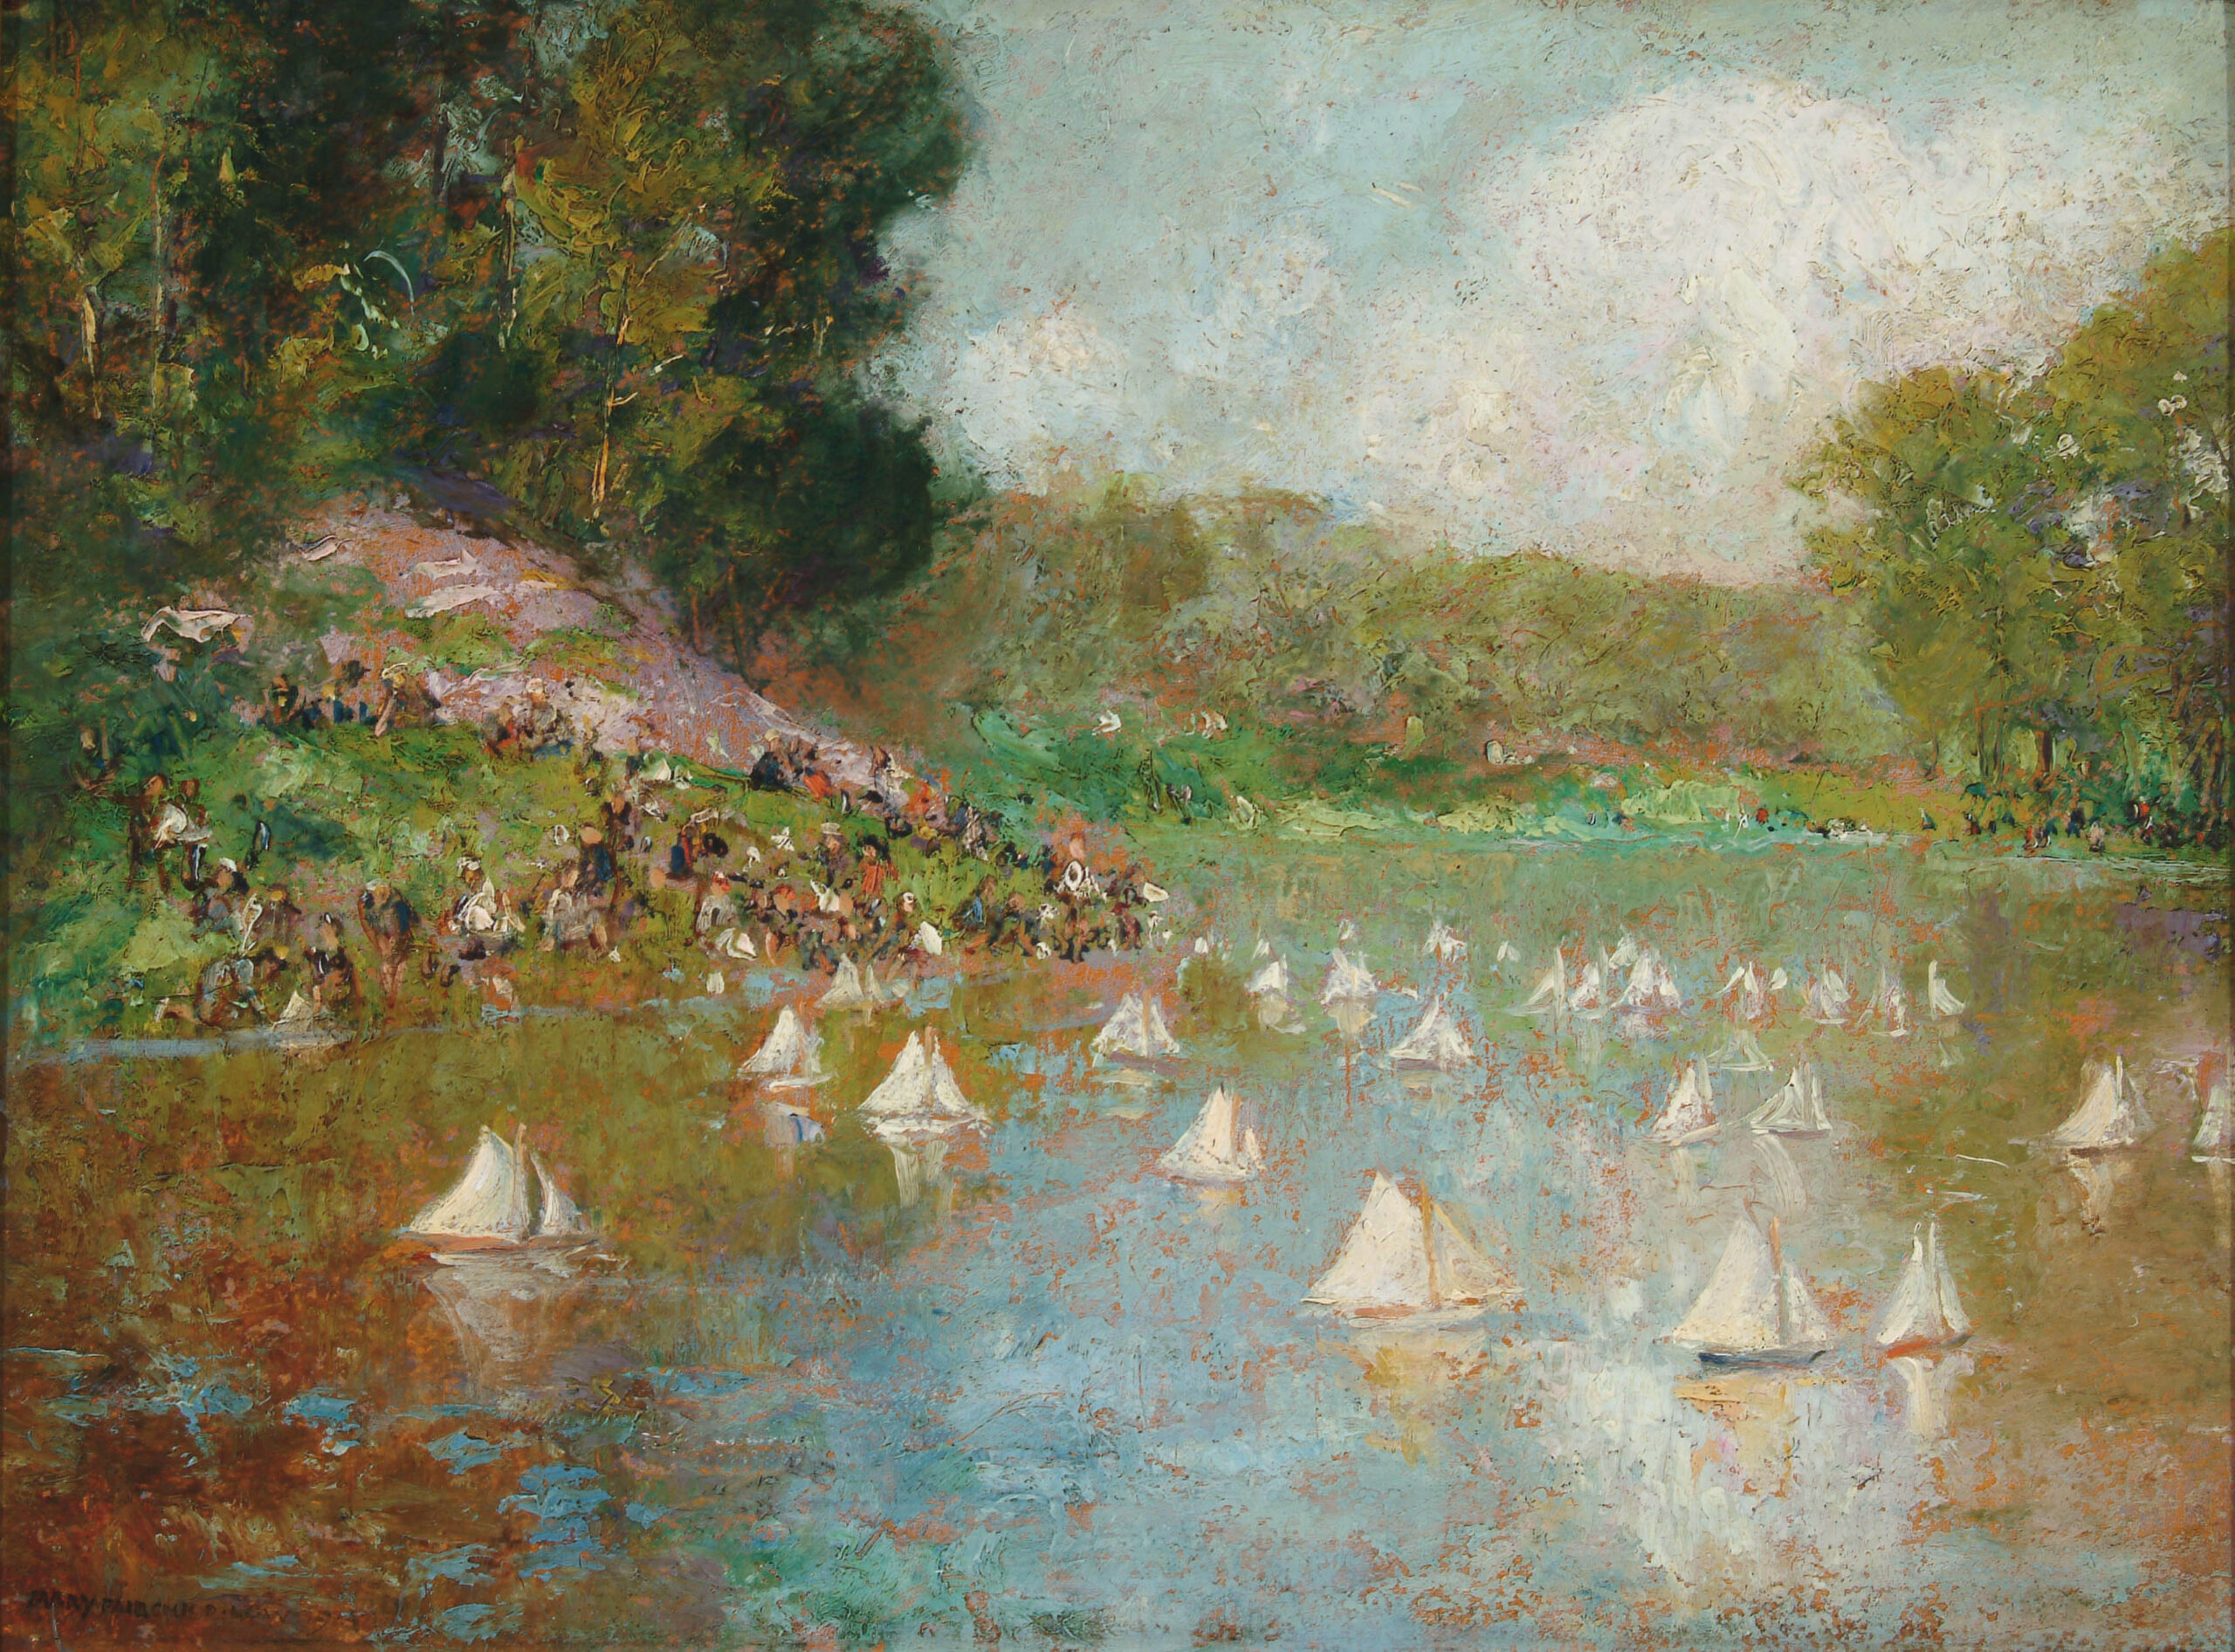 MARY FAIRCHILD (MACMONNIES) LOW (1858-1946) Children’s Regatta at Bronxville Lake, 1924, oil on board, 12 x 16 inches. Purchased in memory of Jean S. Bartlett, Village Historian from 1966-1987